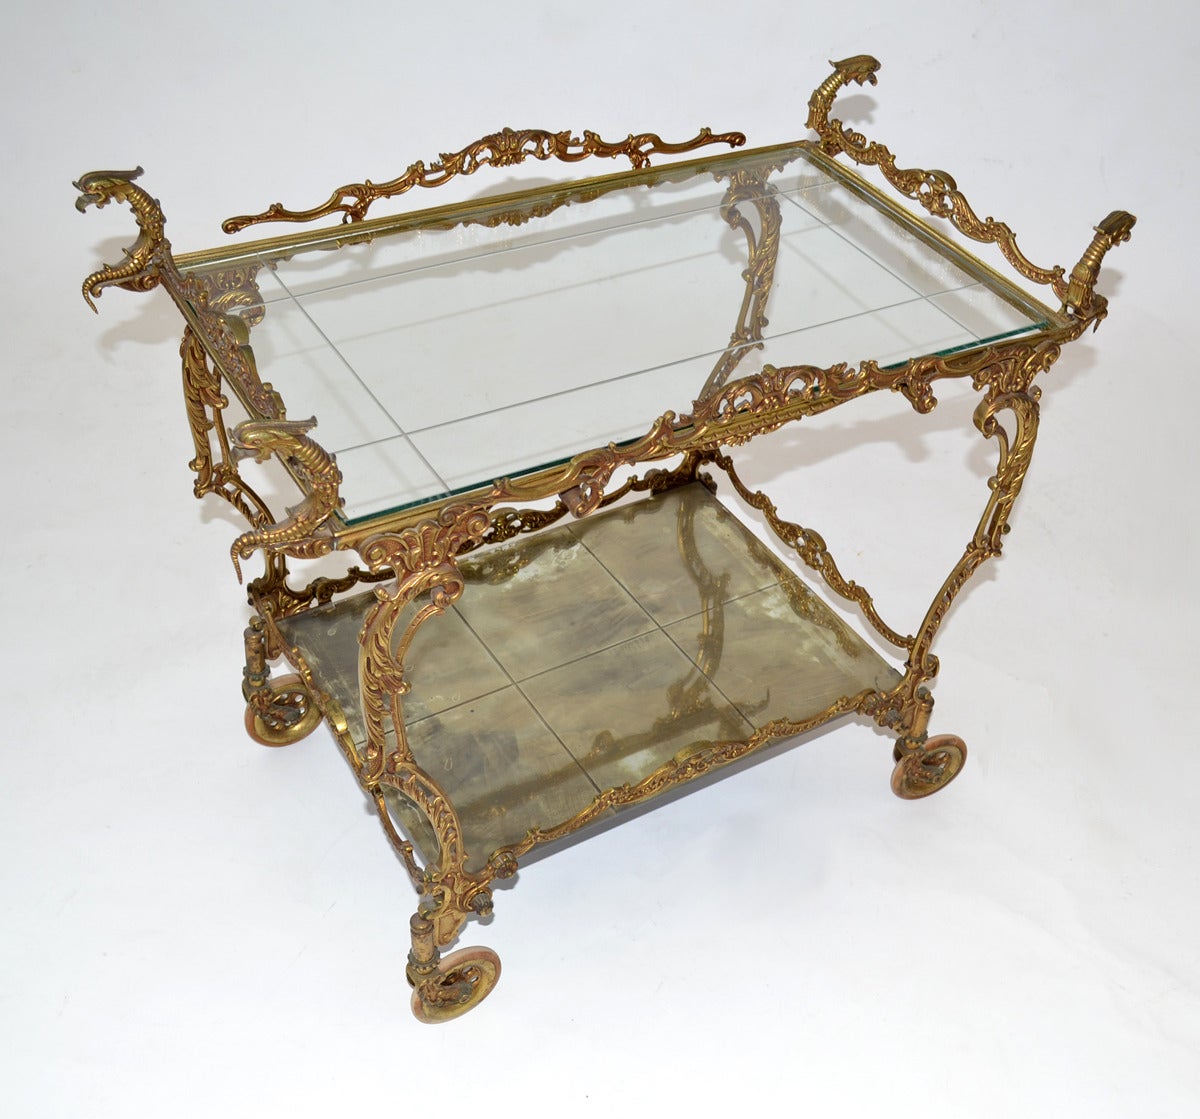 Ornate brass Baroque-style cart or tea trolley in ornate brass, glass and silvered-mirror with original wooden wheels. Overall height 26